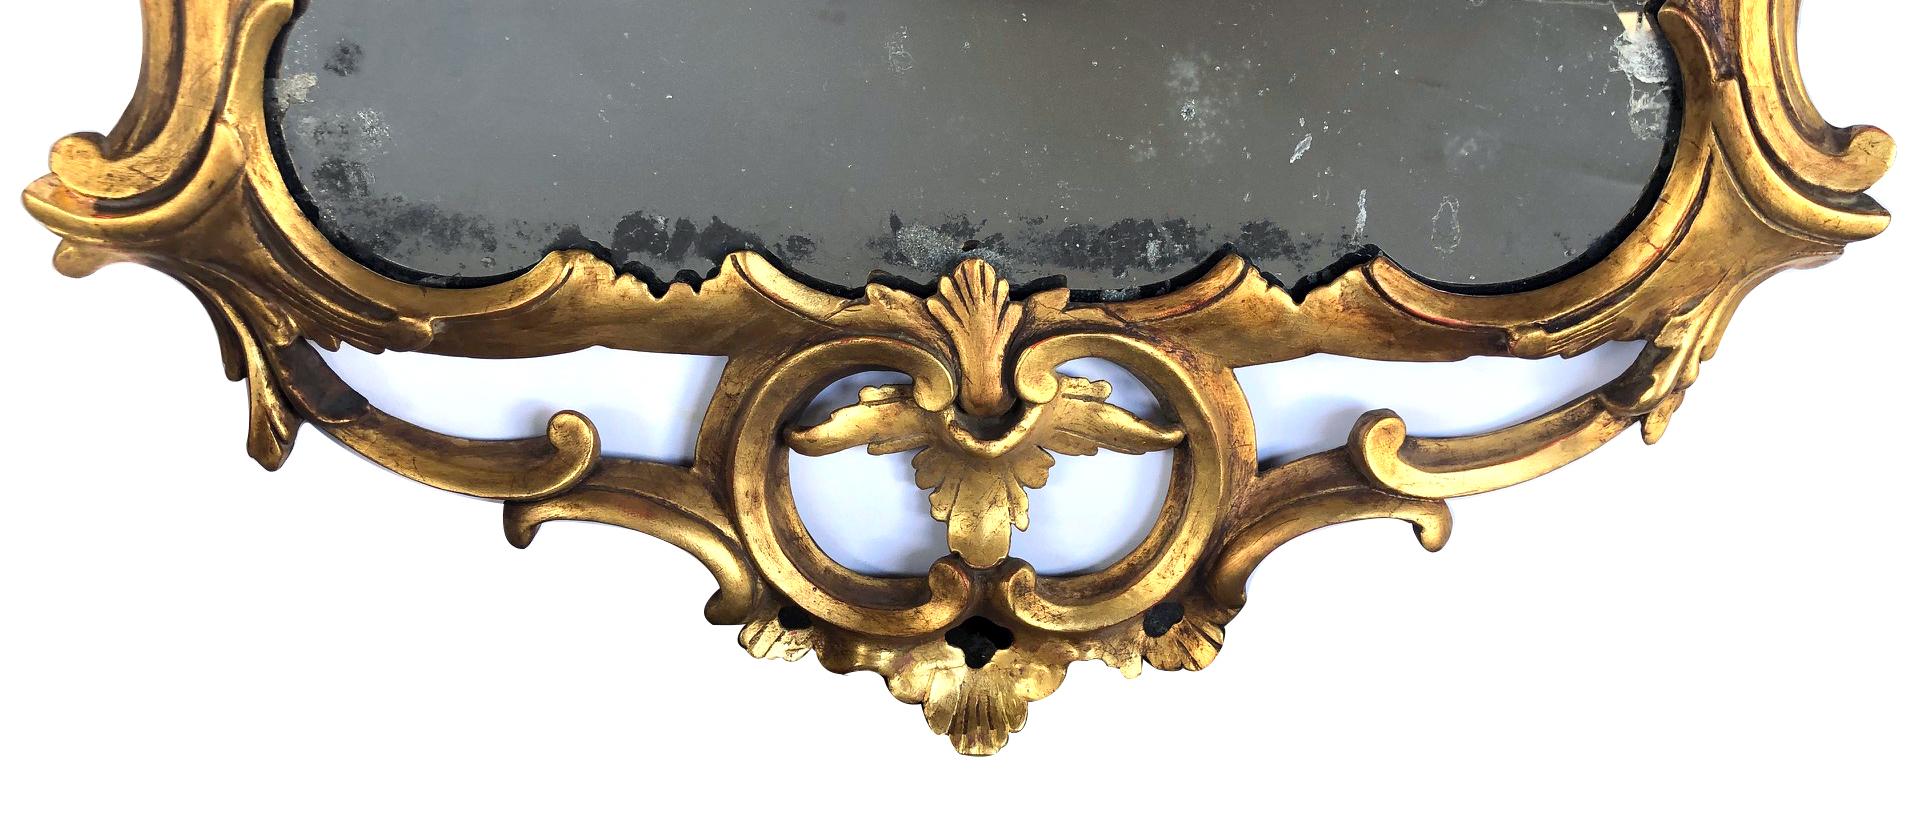 Hand-Carved Continental Rococo Revival Foliate Giltwood Mirror For Sale 1